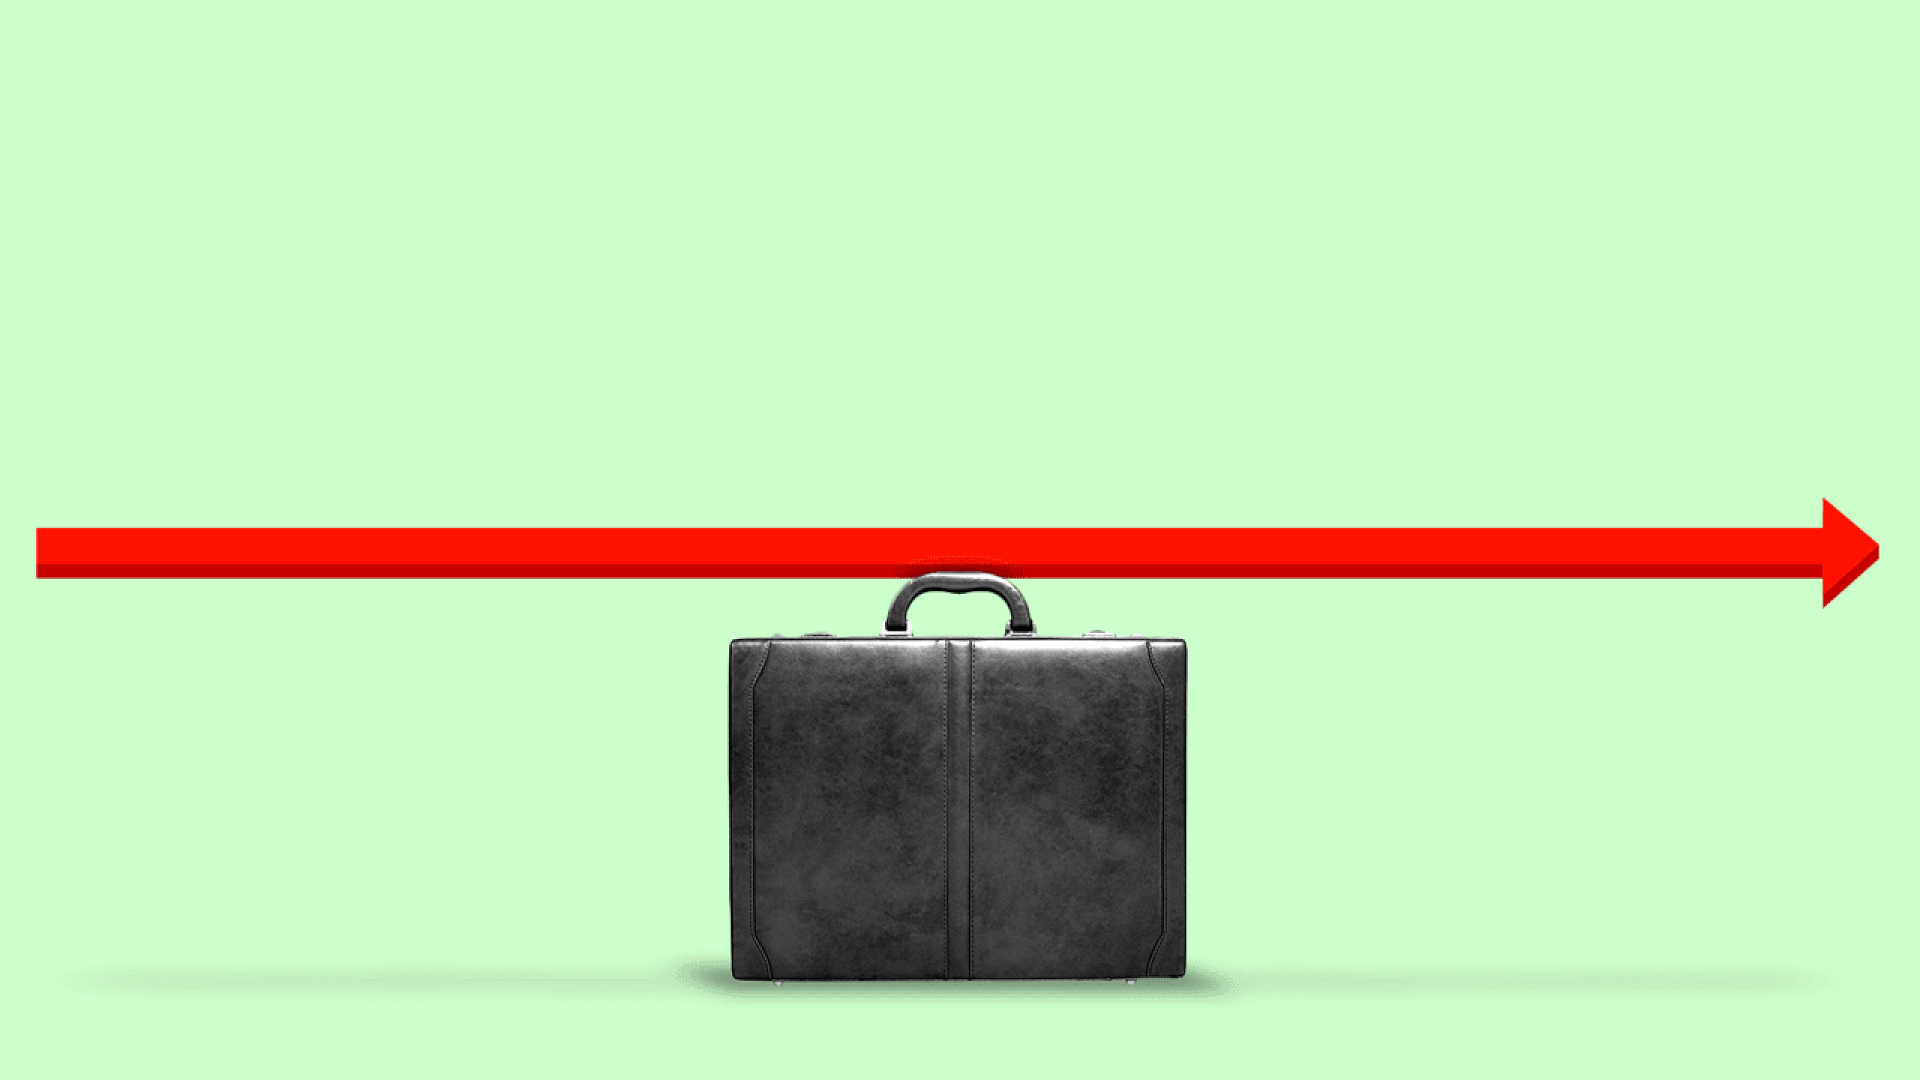 Illustration of a see-saw balanced on a briefcase.